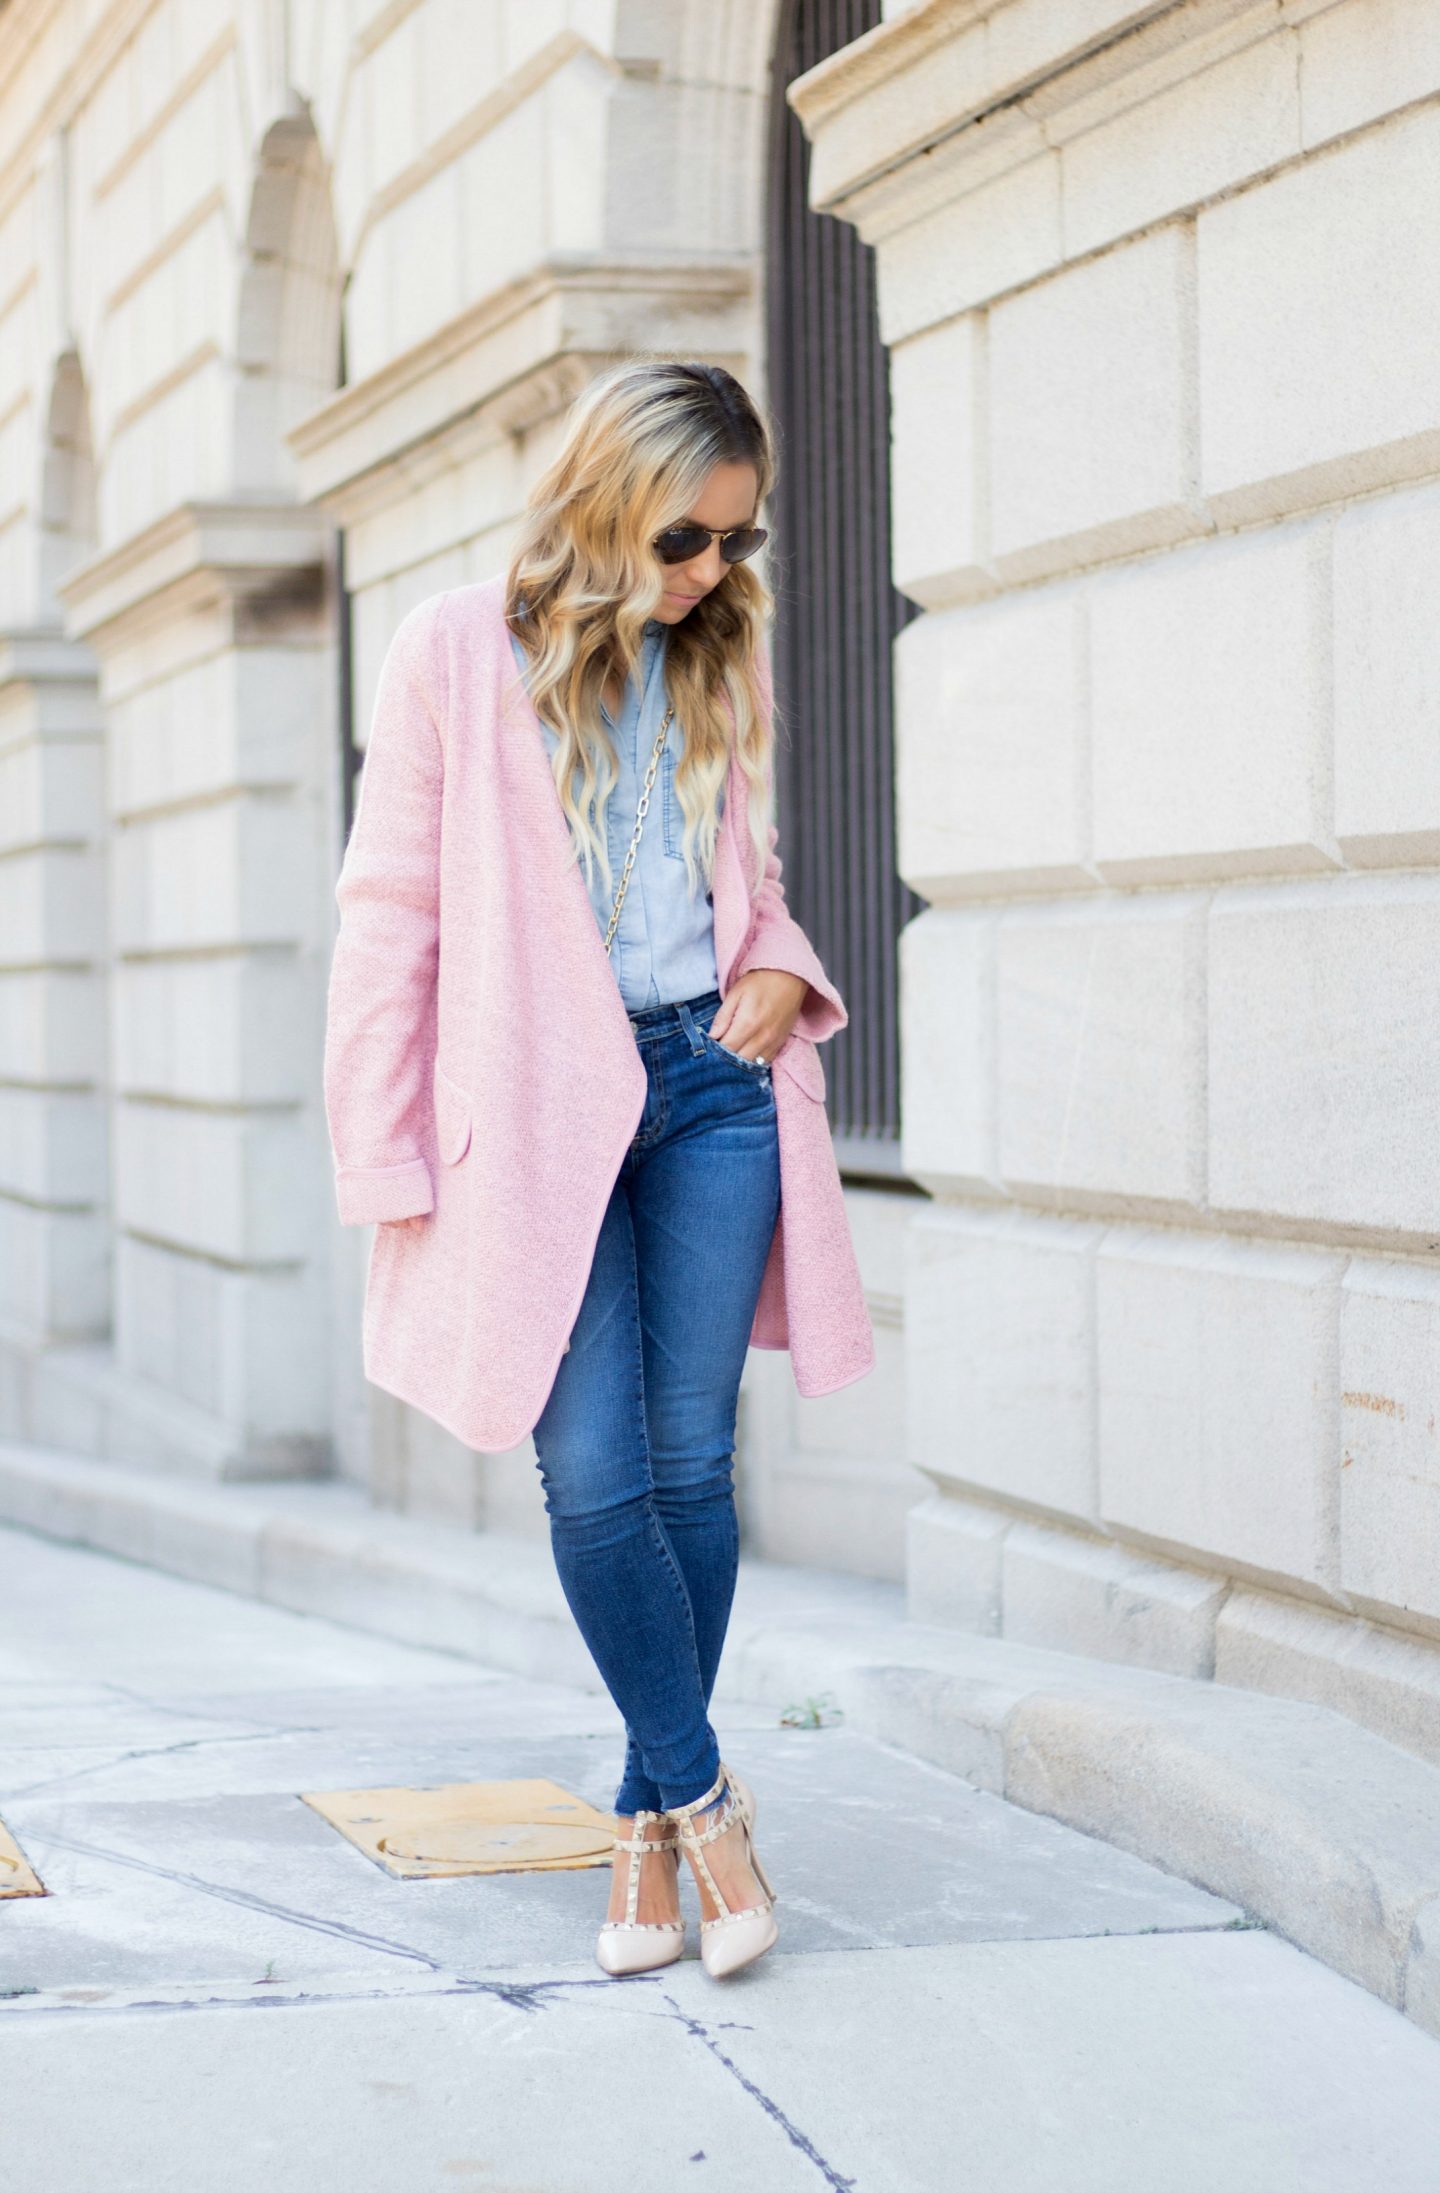 Affordable Must Have Pink Coat - According to Blaire